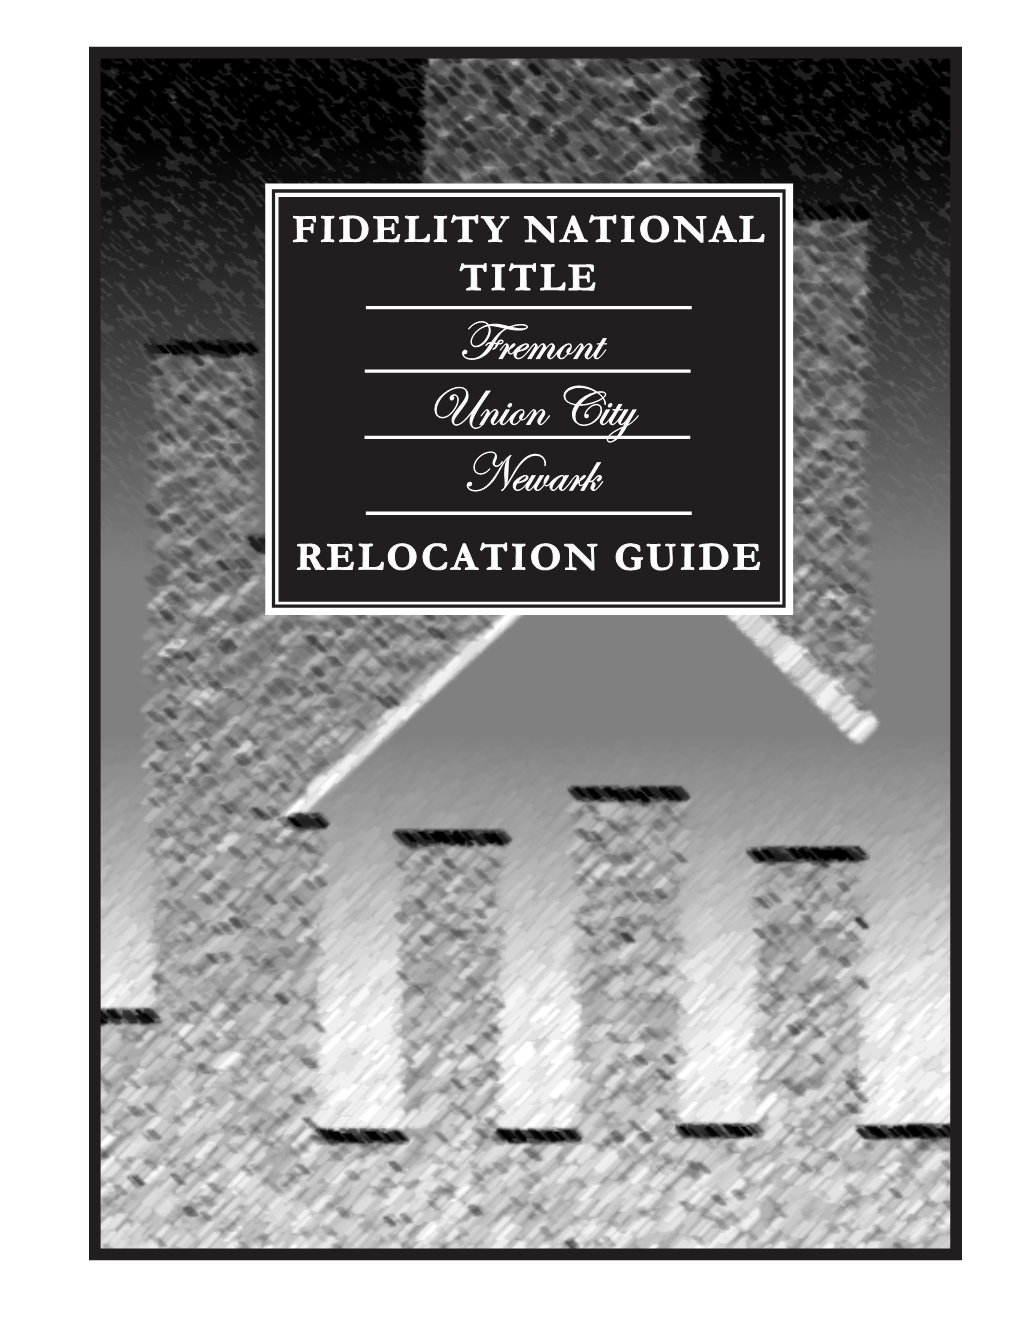 Fremont Union City Newark RELOCATION GUIDE This Book Has Been Provided for You by Fidelity National Title the Closing Company